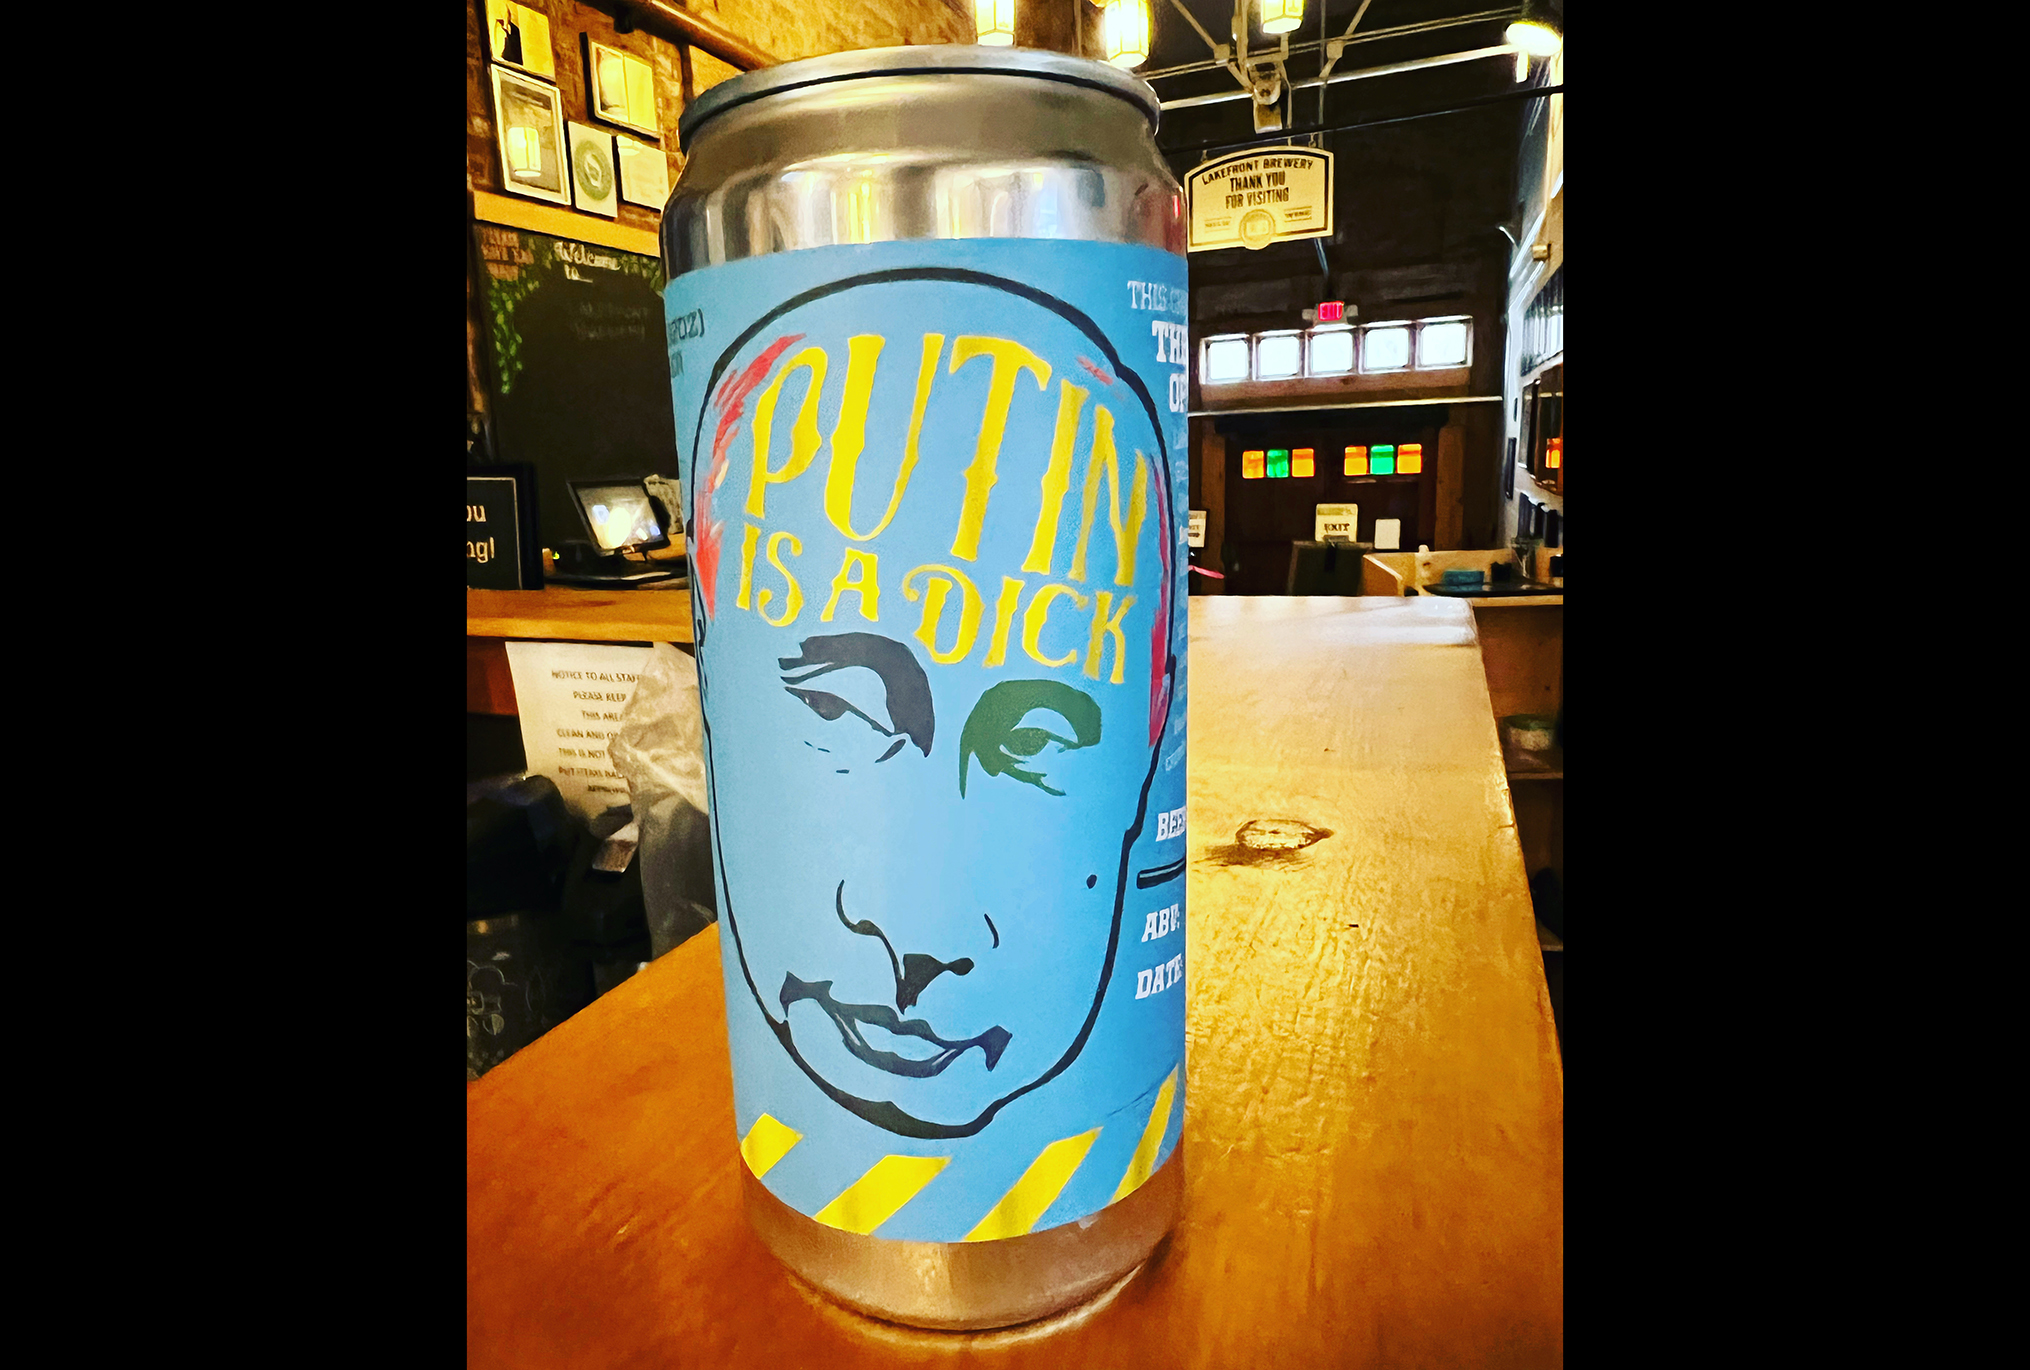 New beer label raises money for Ukraine by taking pointed and profane aim at Putin